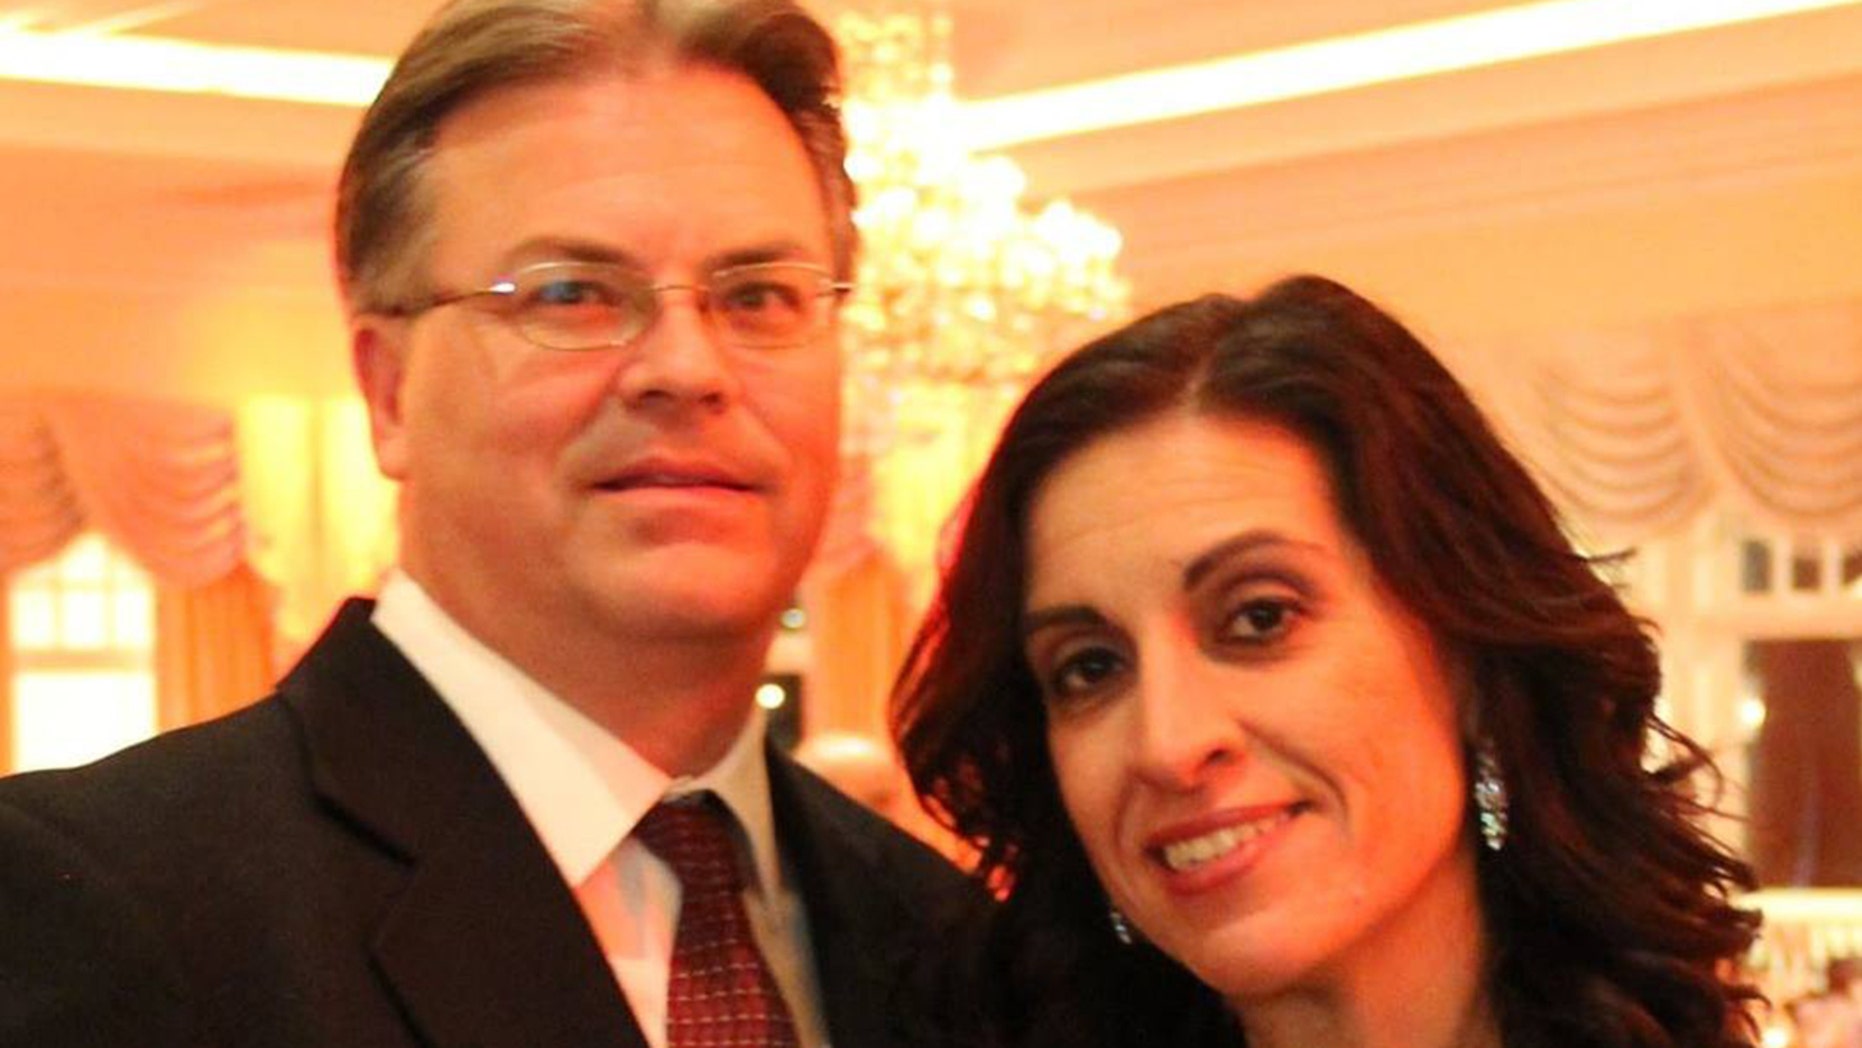 New Jersey wife found slain in home, husband jumped off bridge in apparent murder-suicide